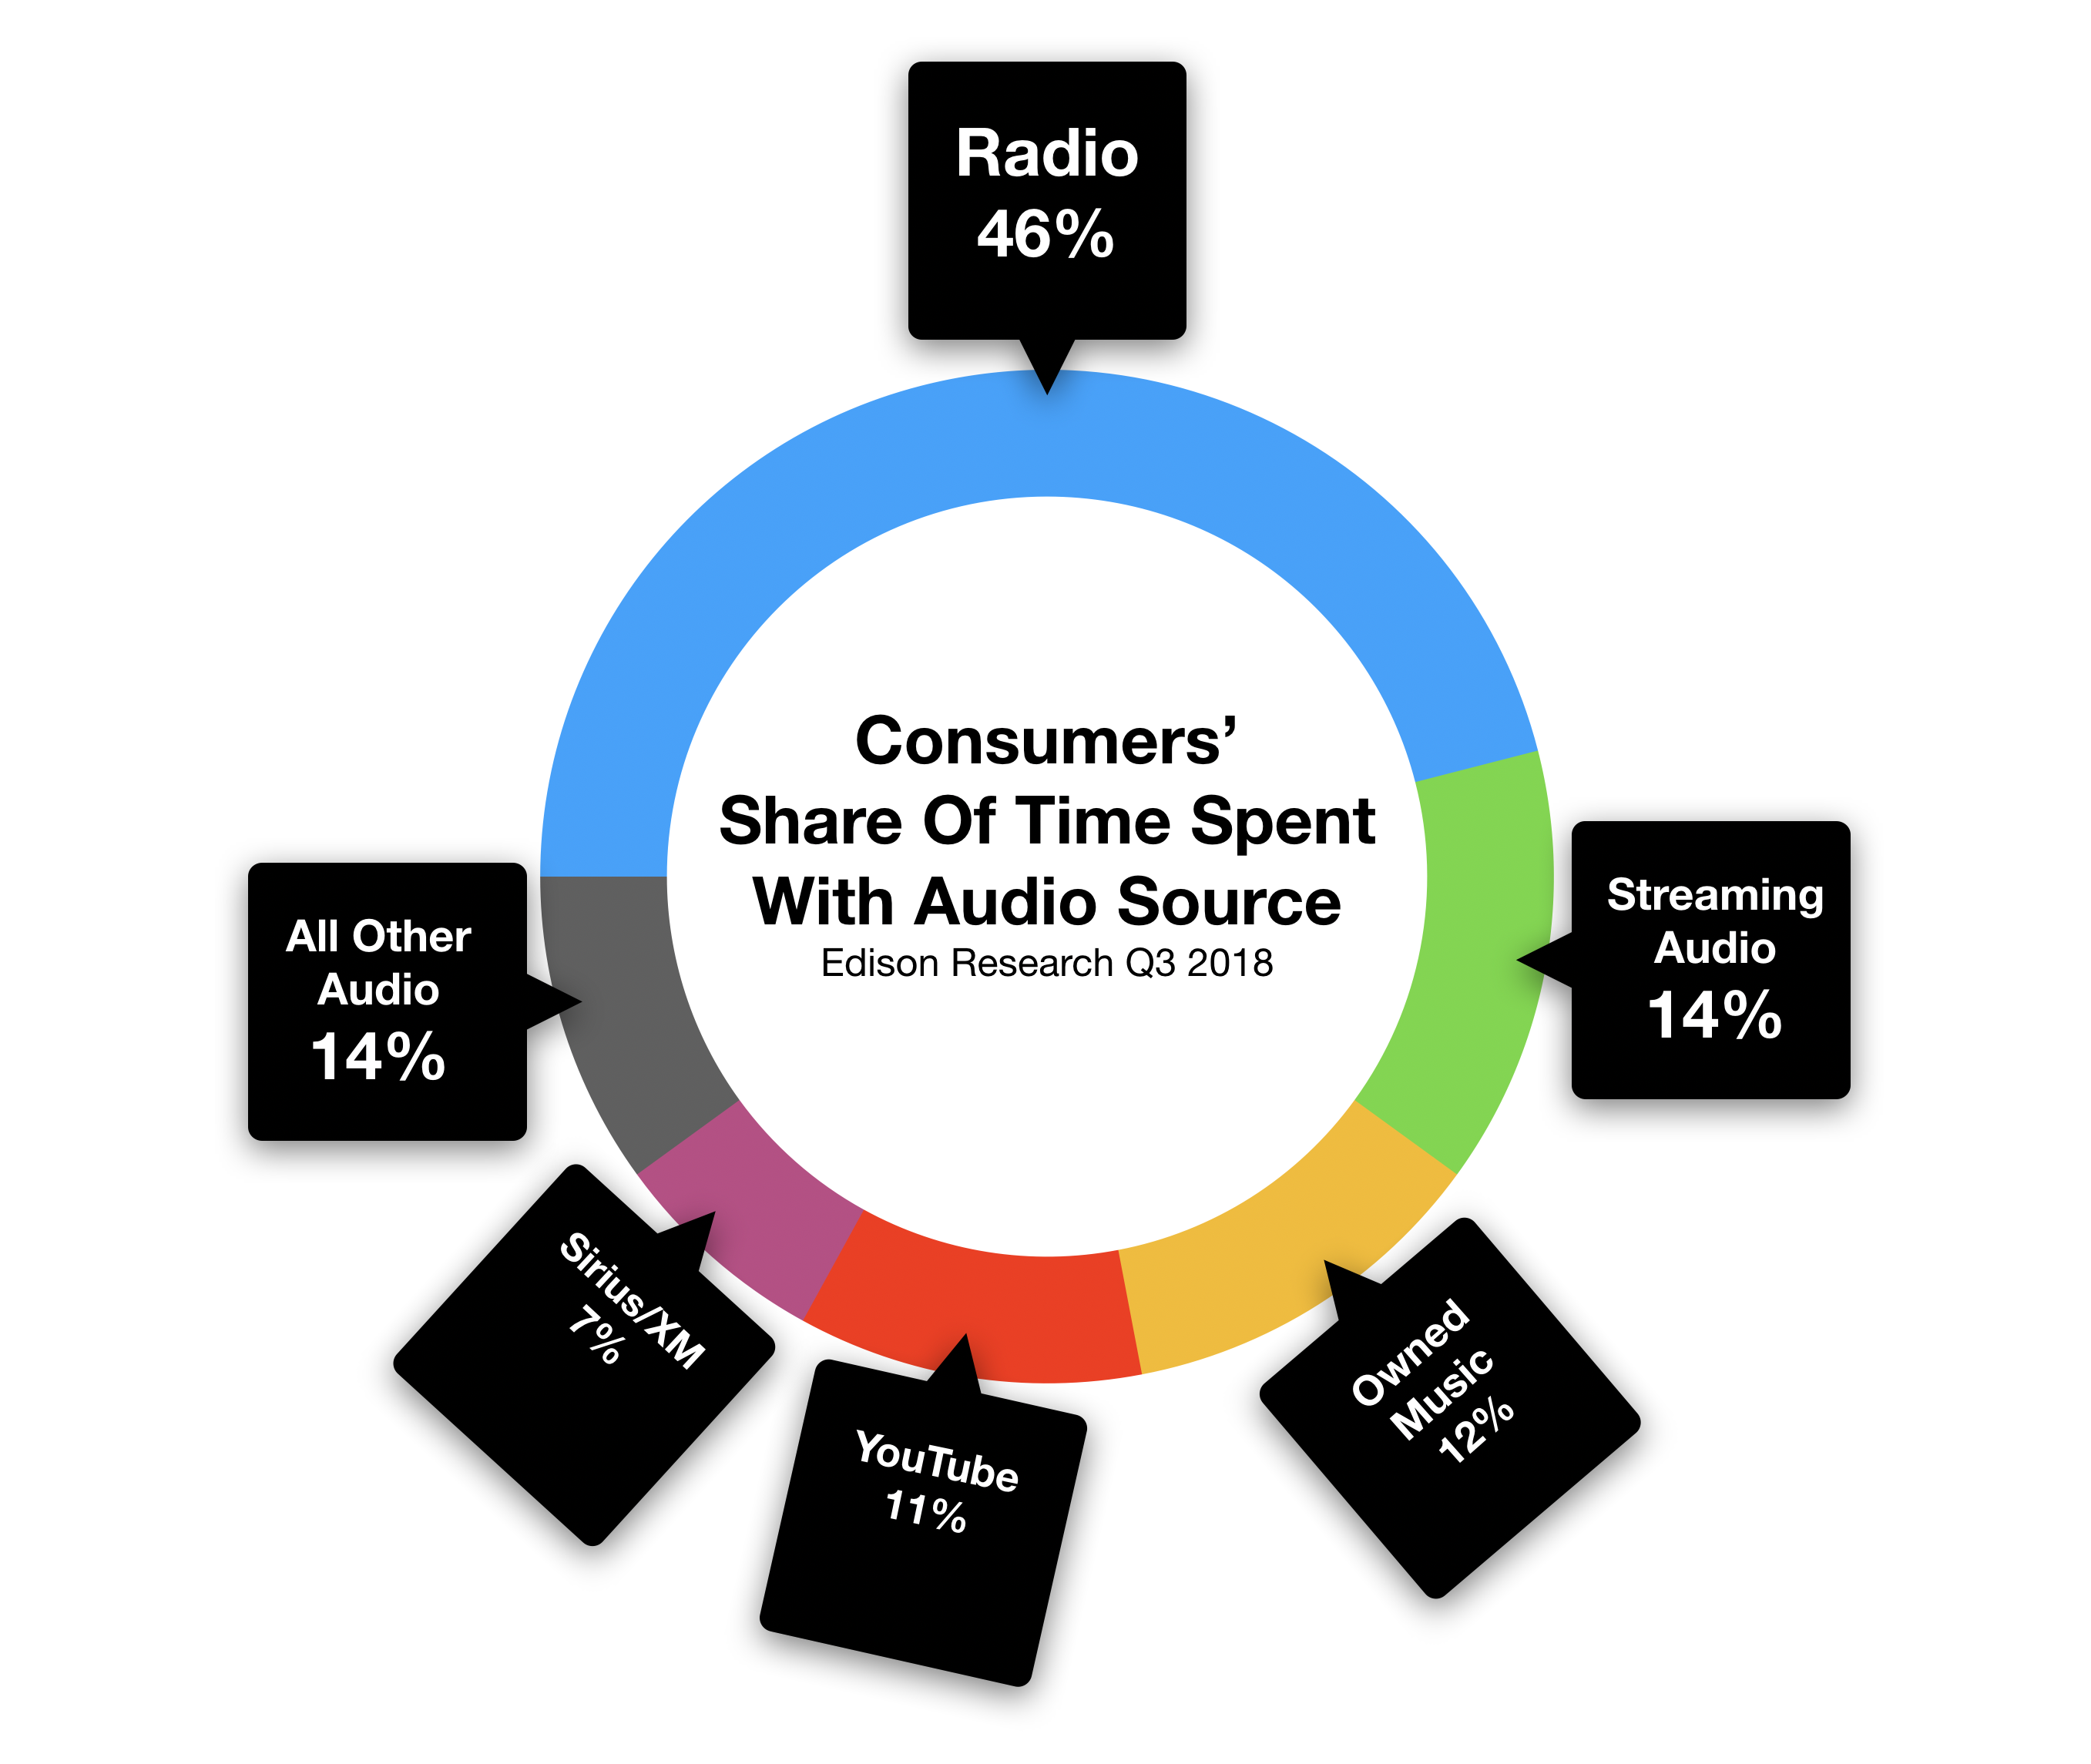 Tampa Consumer Share of Audio Time Spent With Radio